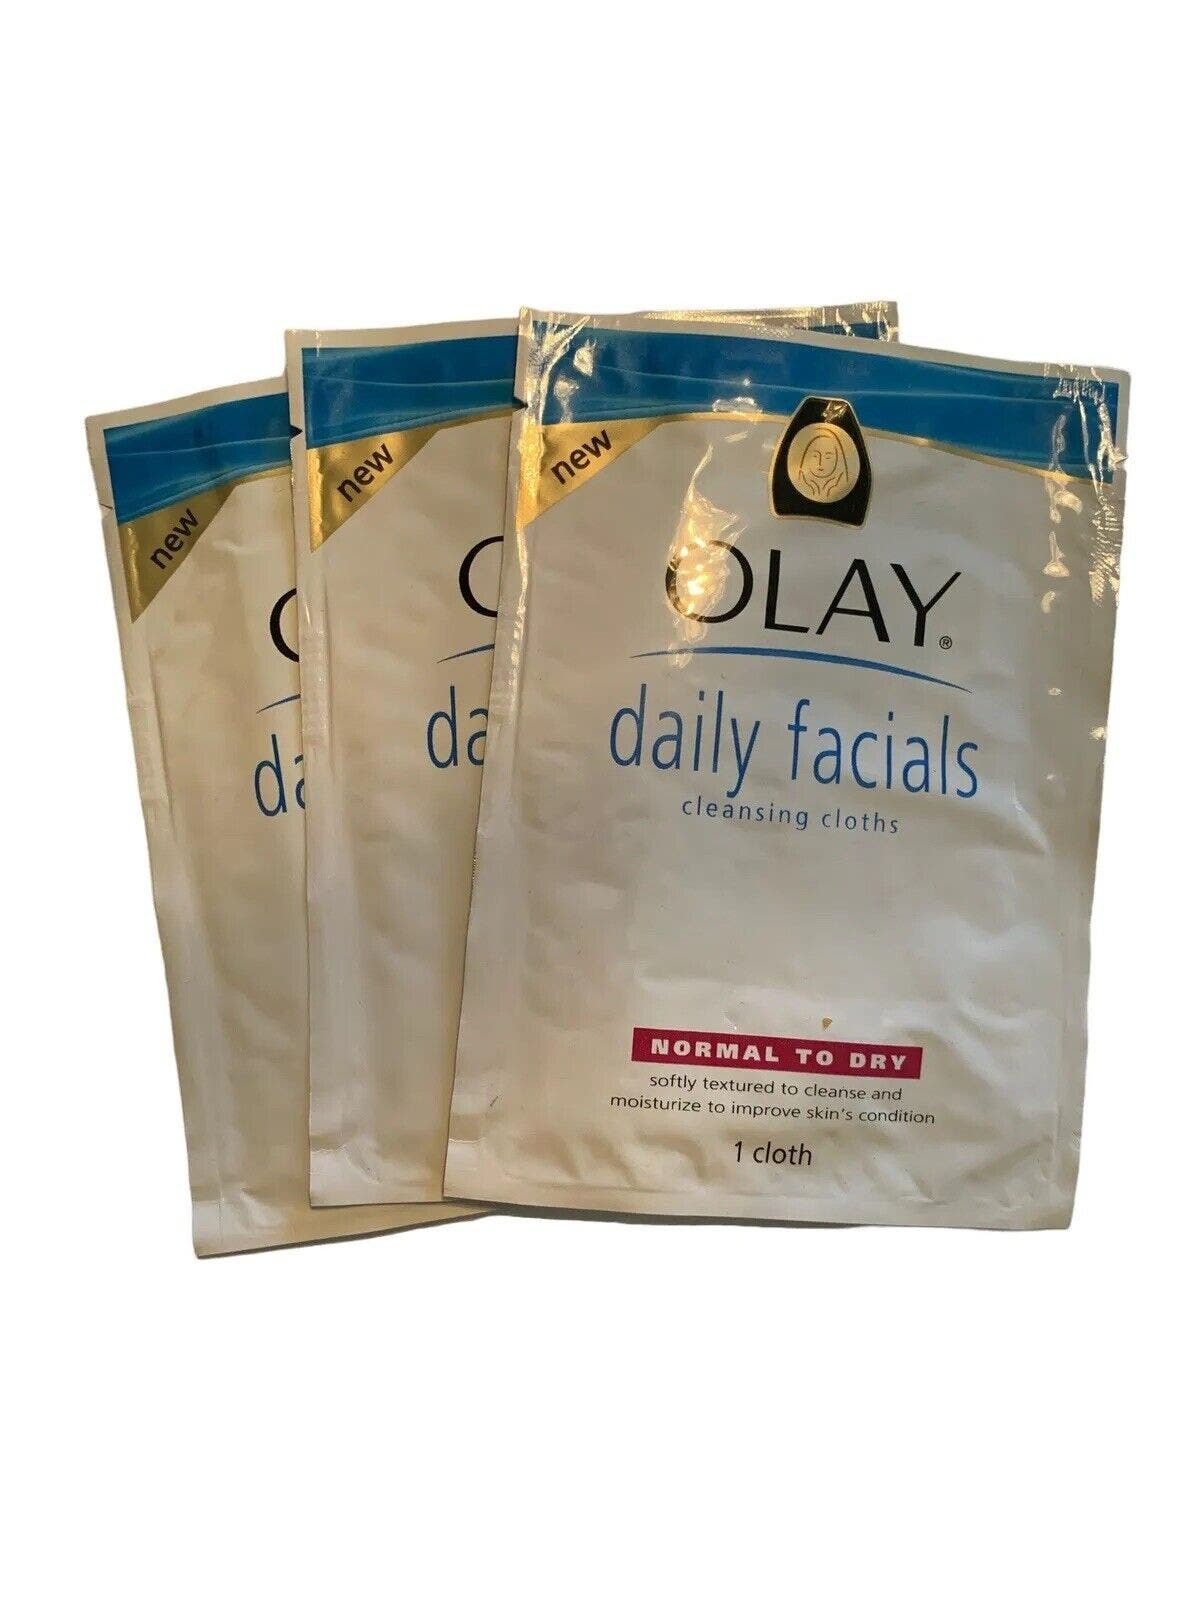 Primary image for Olay Daily Facials Cleansing Cloths Normal To Dry 3 Cloths